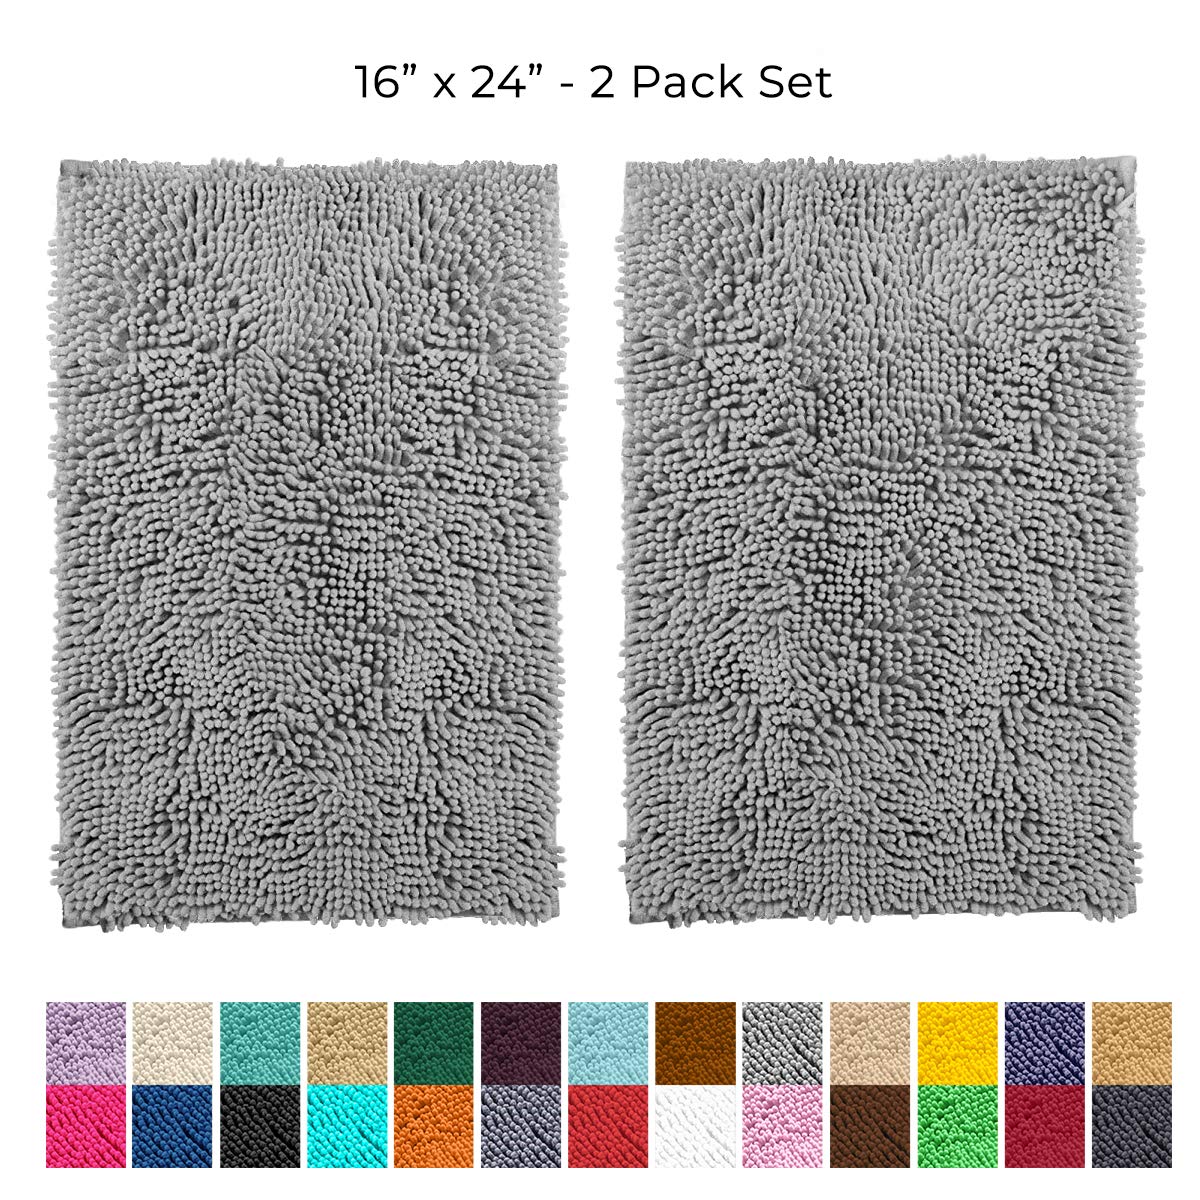 LuxUrux Bathroom Rugs Sets 2 Piece - Plush Bath Mat Set Quick-Dry Soft Chenille Bathroom Mat with Rubber Backing, Absorbant Bathroom Rug Set, Washable  - Like New